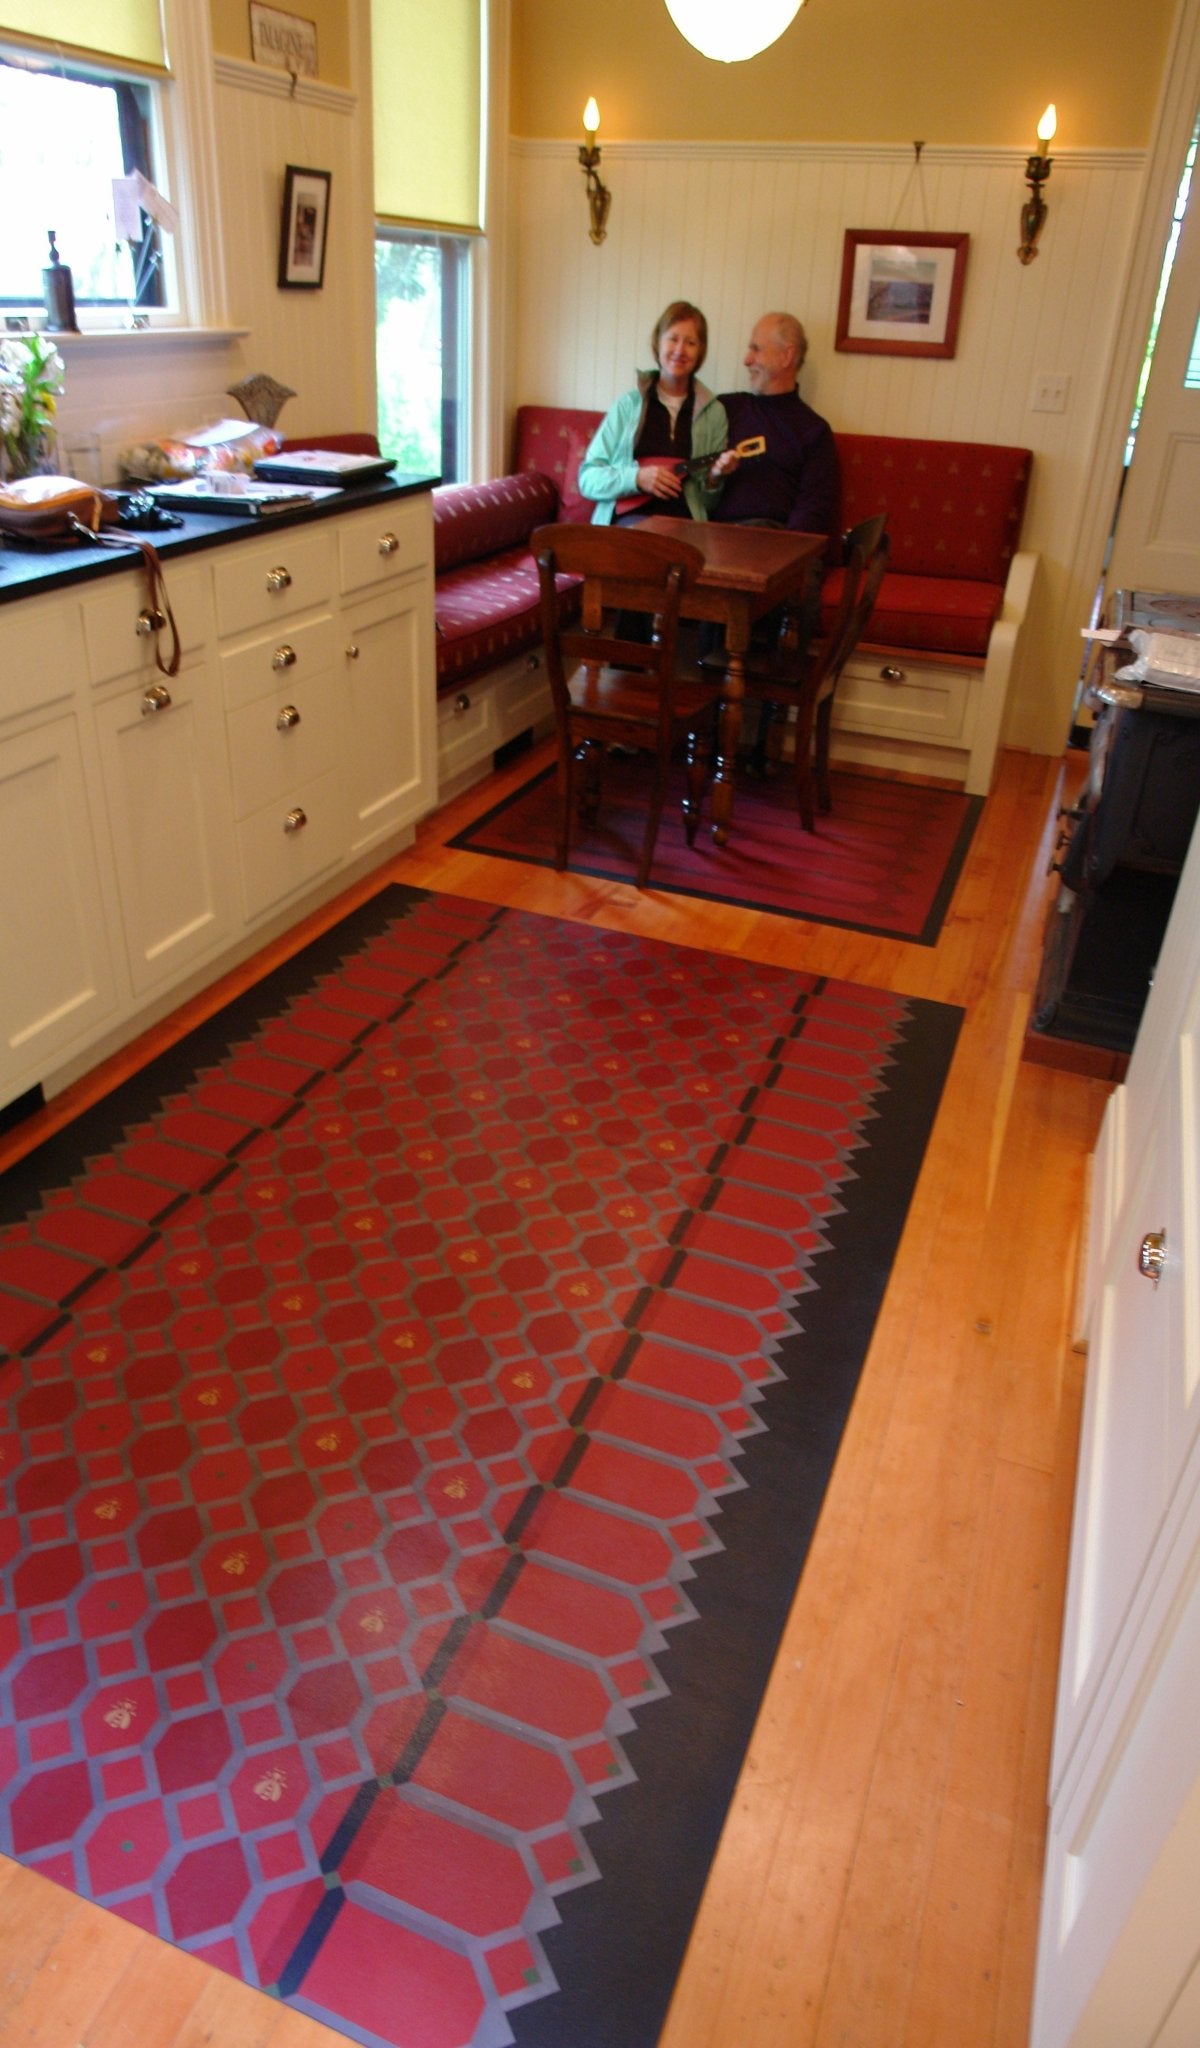 An in-situ shot of Honeycomb Floorcloth #1 in its lovely kitchen.